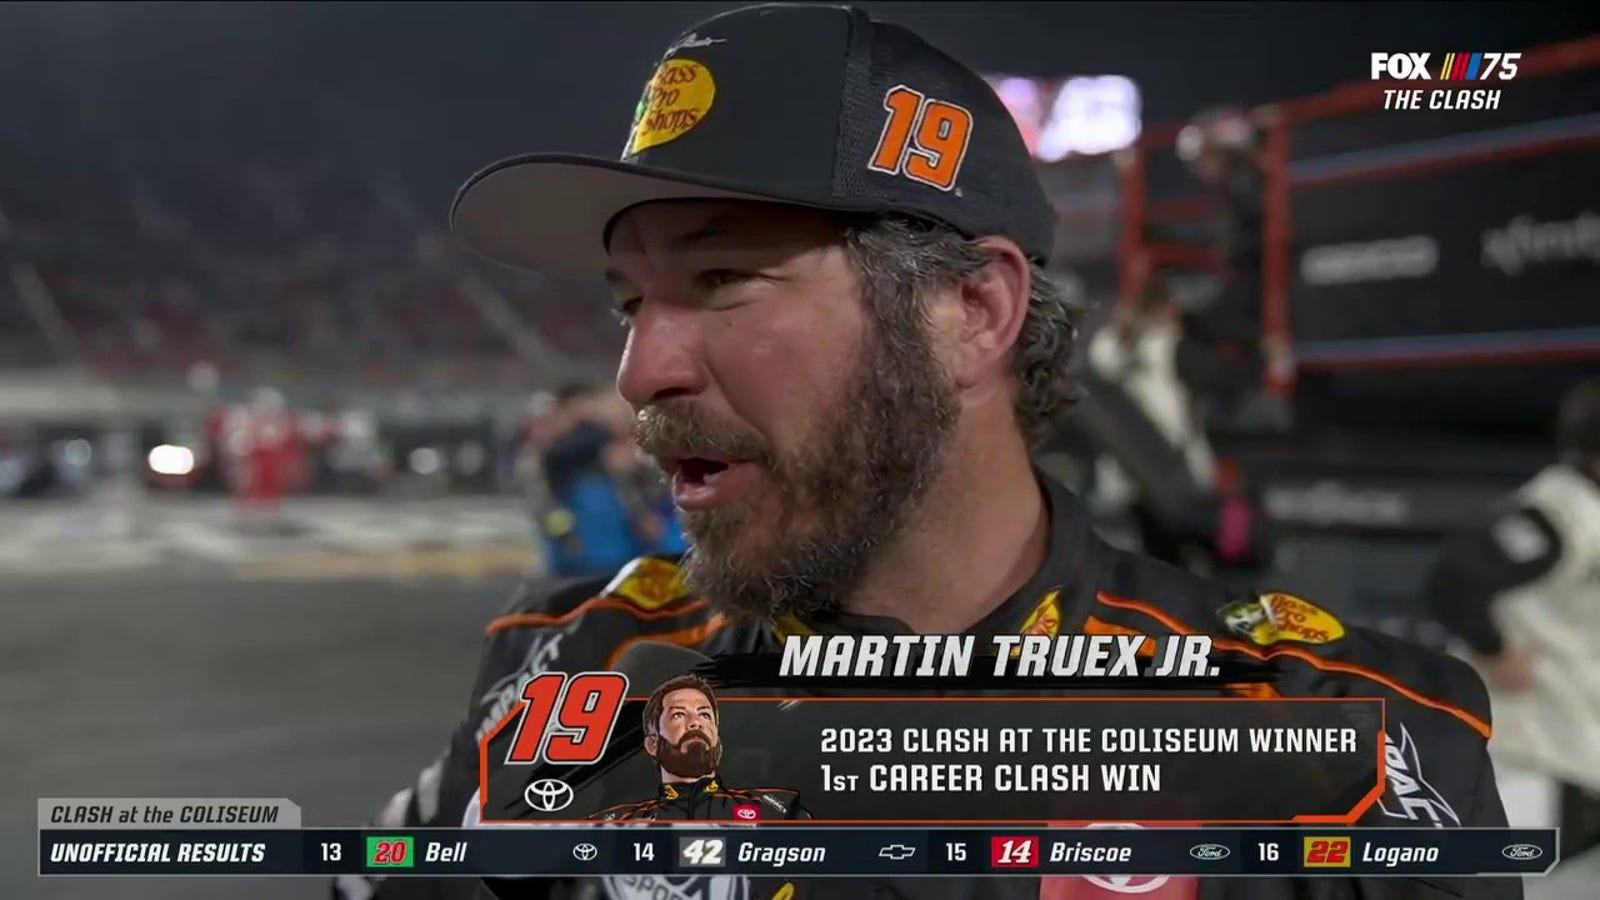 'Tonight was to persevere and not give up' – Martin Truex Jr.